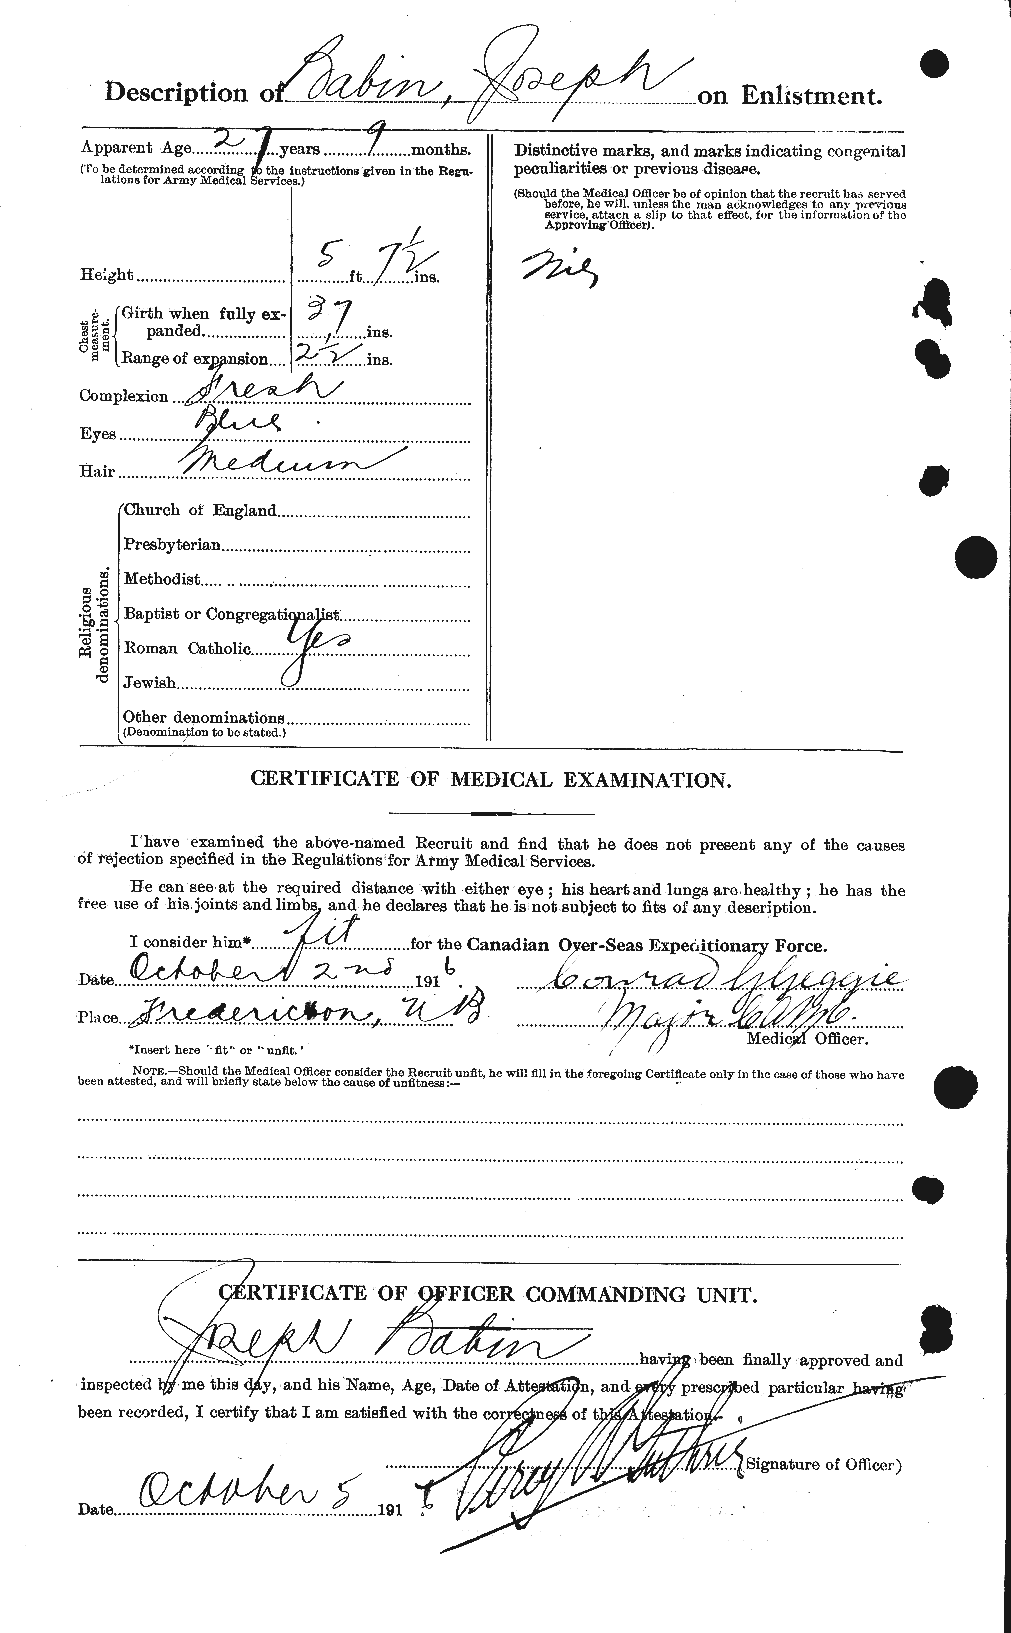 Personnel Records of the First World War - CEF 218139b